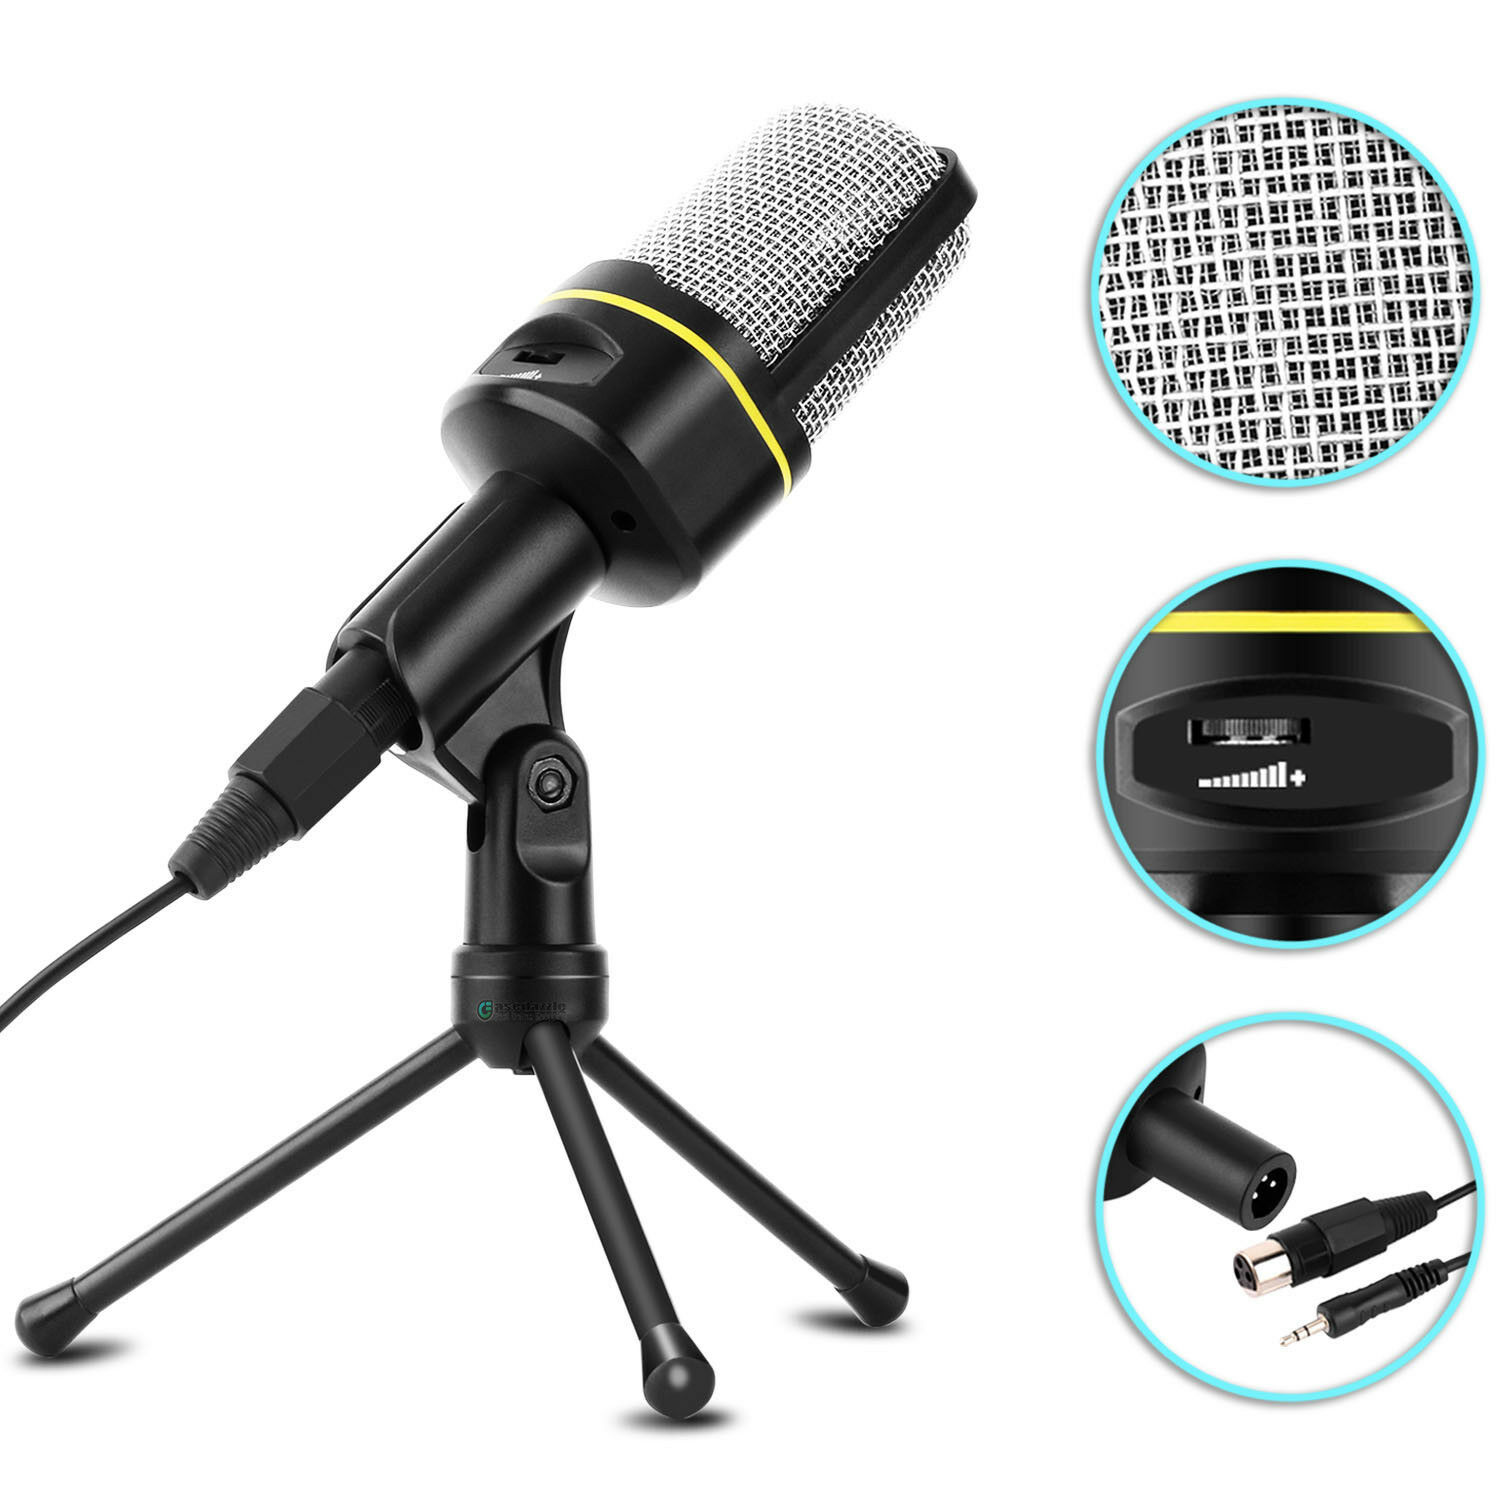 Microphone With Mini Stand Tripod Audio Recording For Computer Pc Phone Desktop